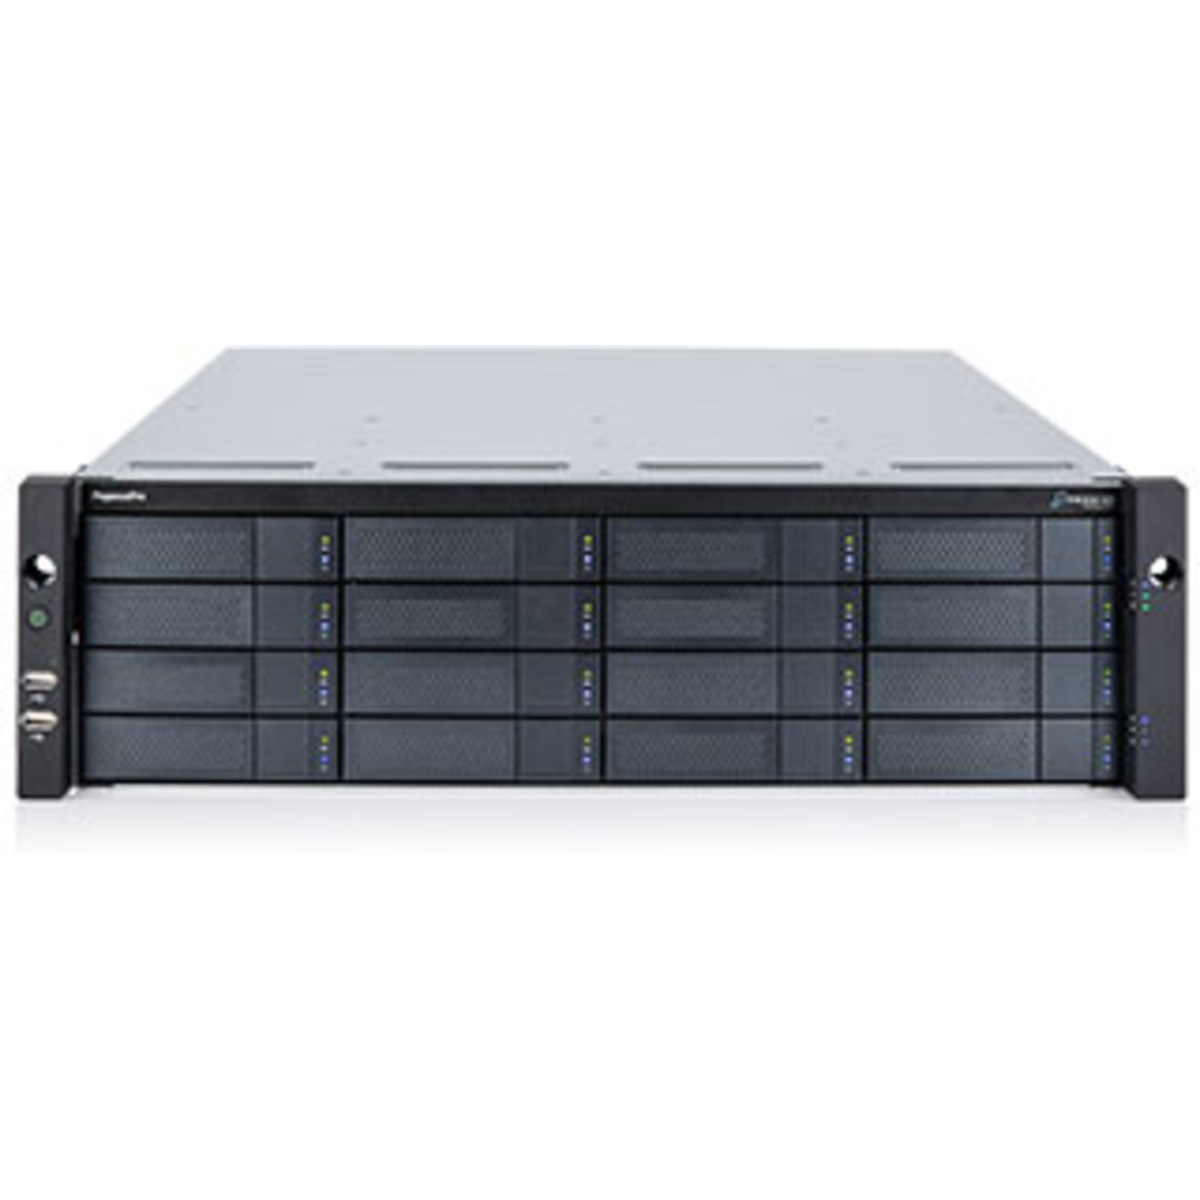 Promise Technology PegasusPro R16 RackMount 16-Bay Multimedia / Power User / Business DAS-NAS - Combo Direct + Network Storage Device Burn-In Tested Configurations PegasusPro R16